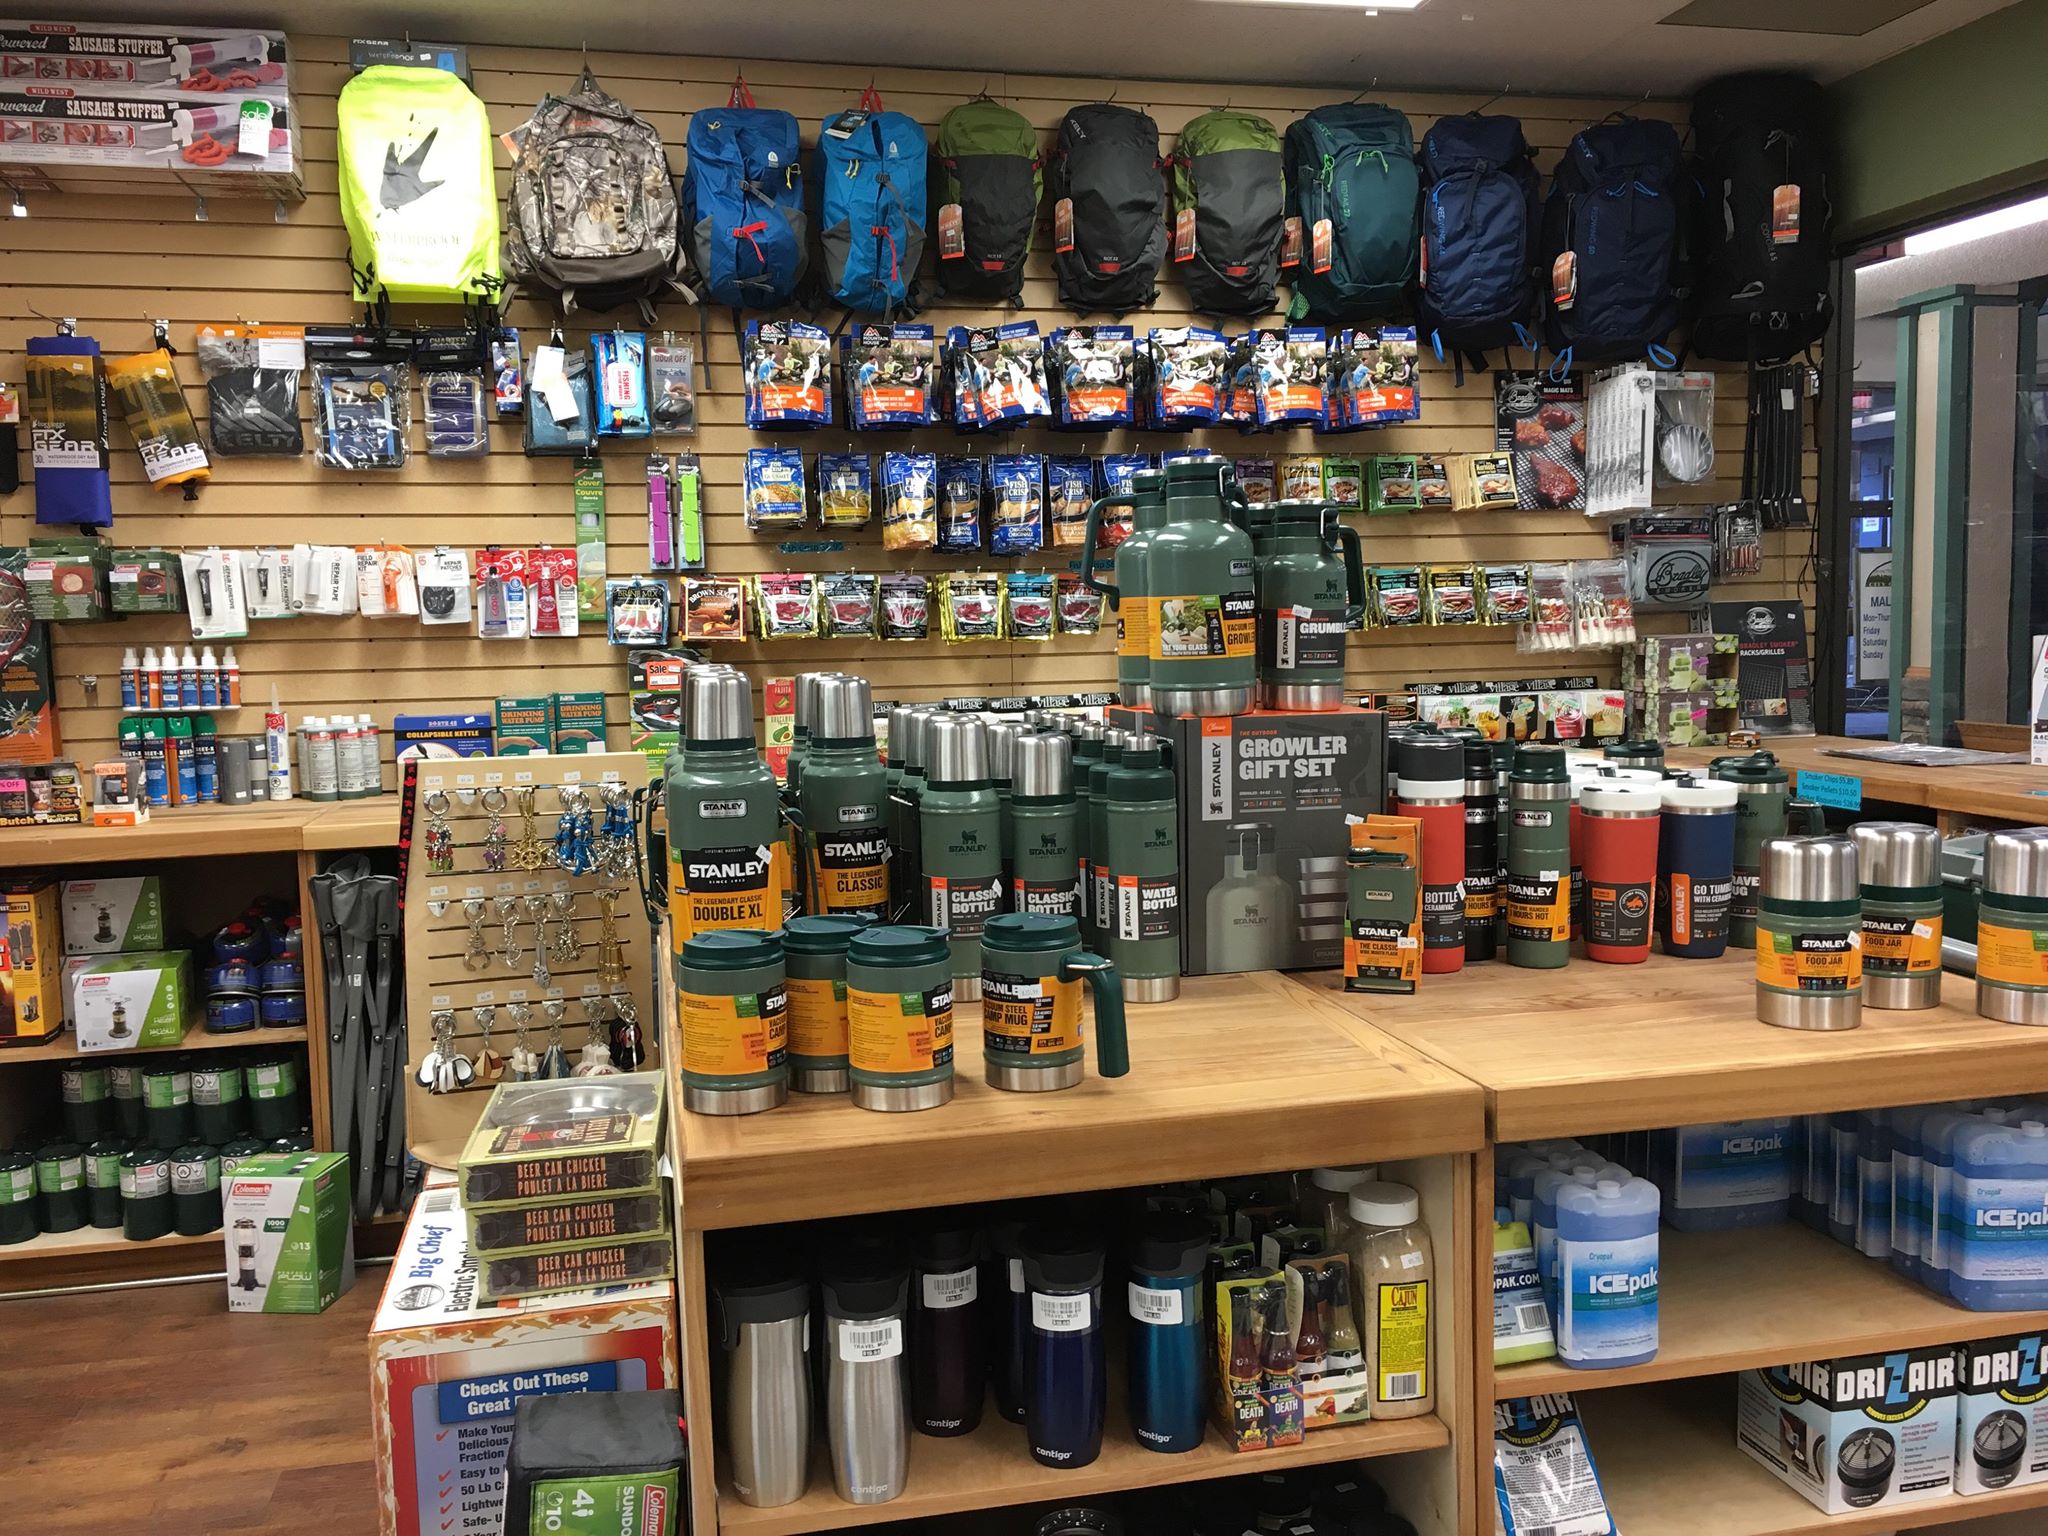 Fishing Tackle Store - Canada's Online Fishing Gear & Lure Shop